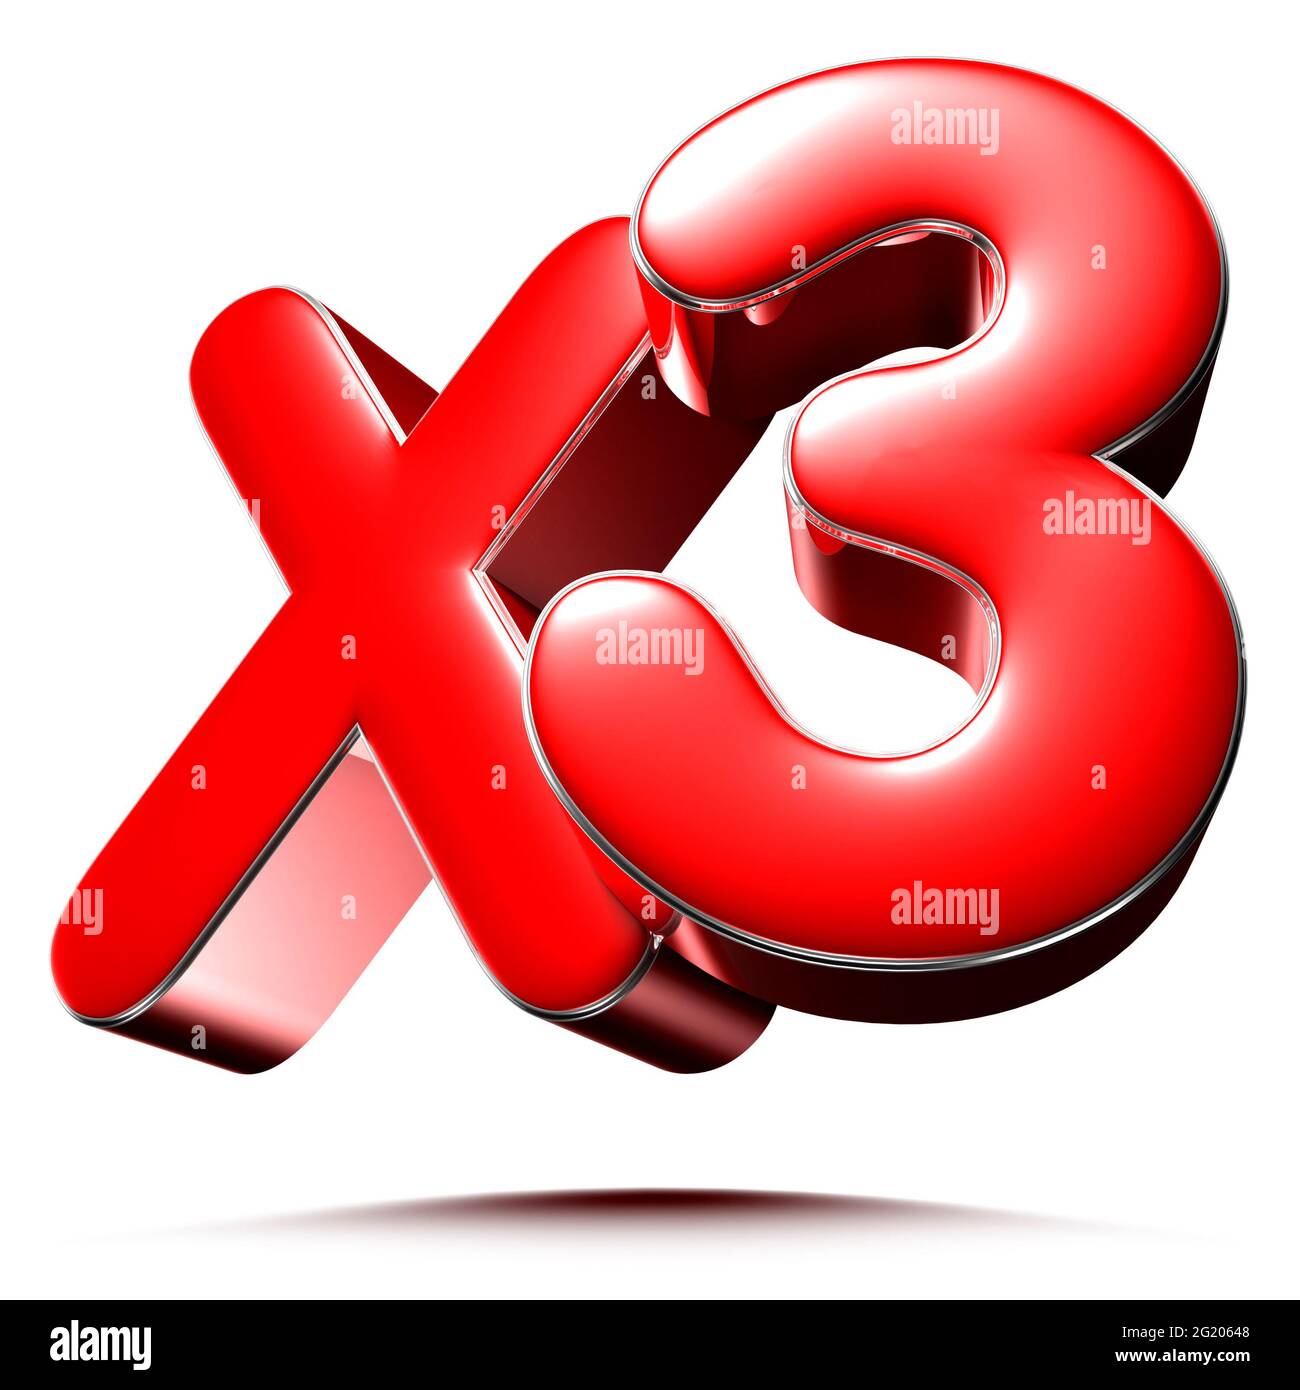 X3 red 3D illustration on white background with clipping path. Stock Photo